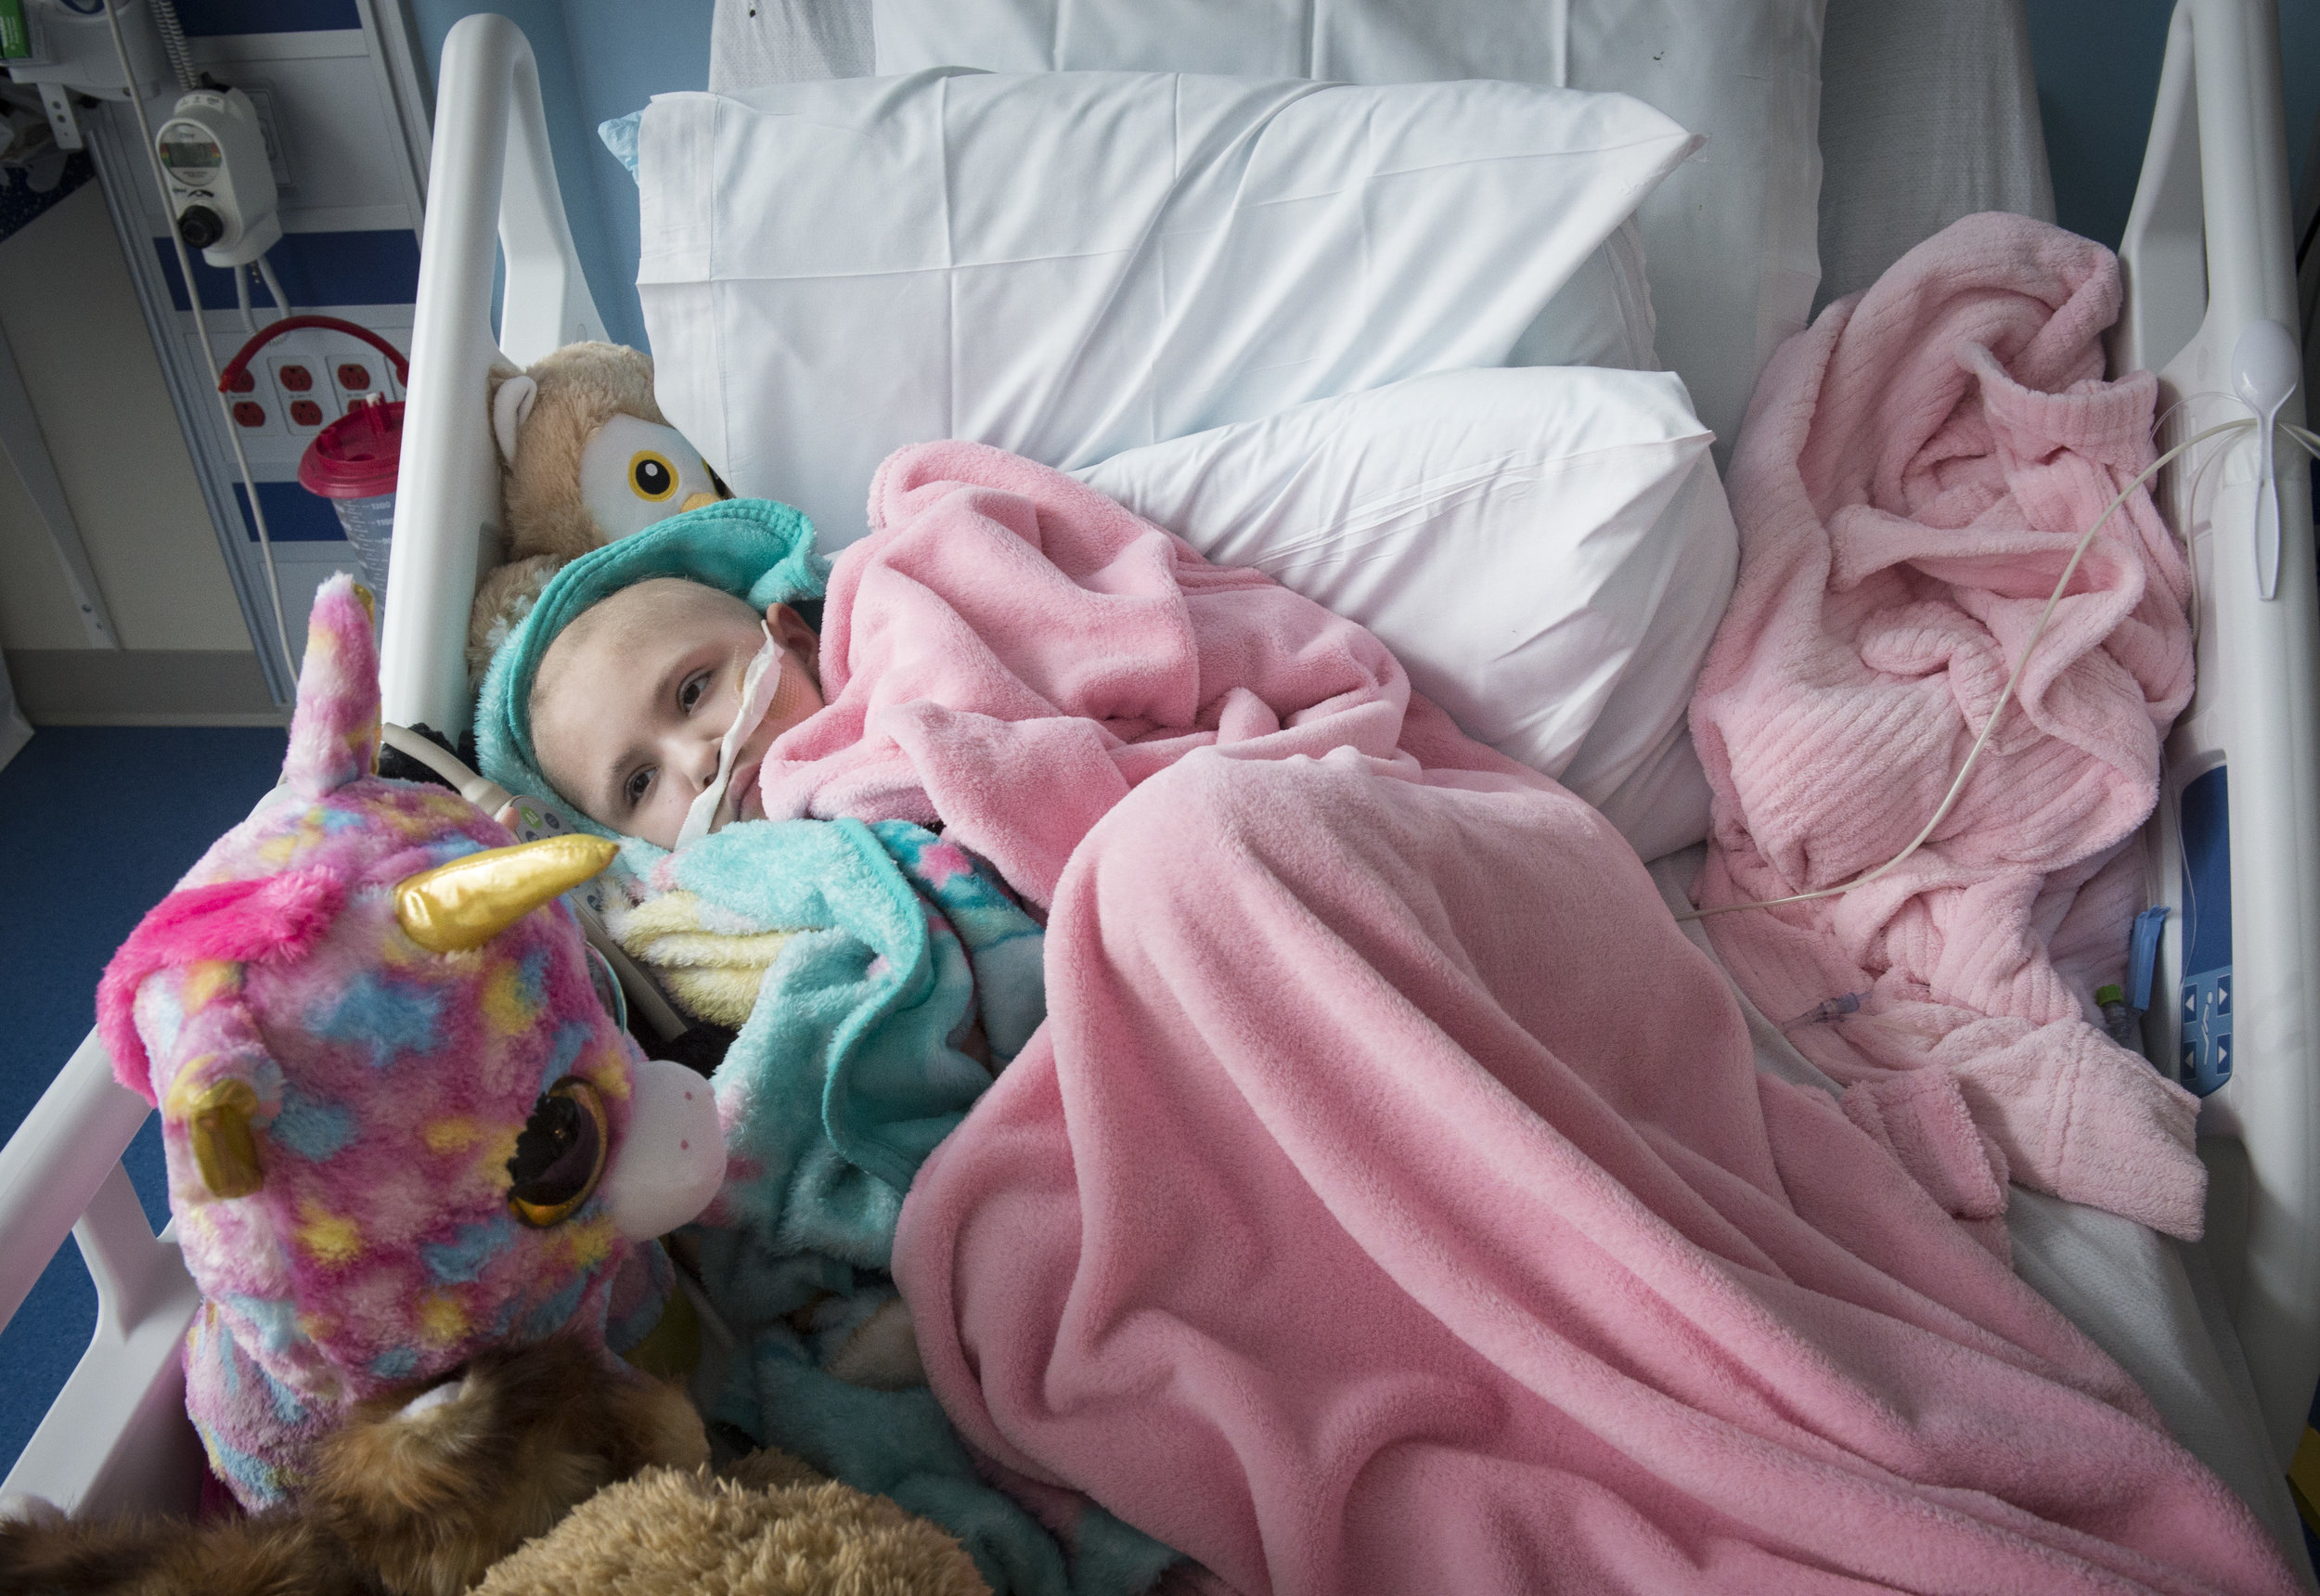  Naomi lays in her hospital bed, bundled up in blankets and surrounded by stuffed animals. 